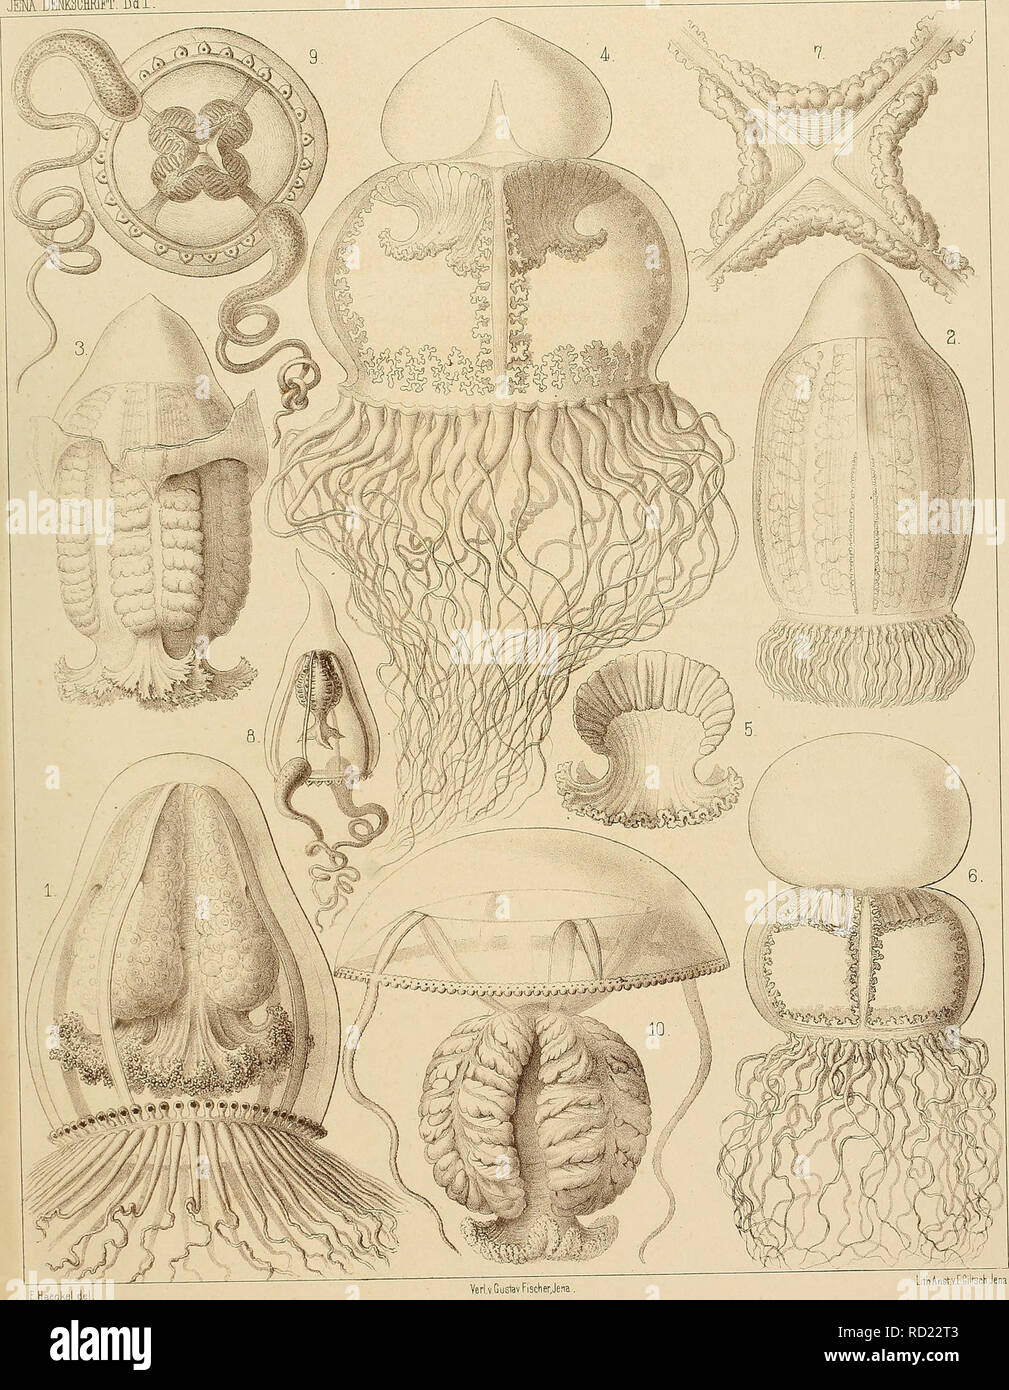 . Denkschriften der Medicinisch-Naturwissenschaftlichen Gesellschaft zu Jena. jBM..DMSCHRIFT.BdL ANTHOMEDUSAE Taf.IV. E.Haeckel de Verl.v.Guslav Fisch erjena, l.Coffls 2.3. Turms, 4-7. Catablema., Ö.Oinem*, 10. Stomotoca. LlthAnsl'.Y.E.SitenhJena. Please note that these images are extracted from scanned page images that may have been digitally enhanced for readability - coloration and appearance of these illustrations may not perfectly resemble the original work.. Medizinisch-naturwissenschaftliche Gesellschaft zu Jena. Stock Photo